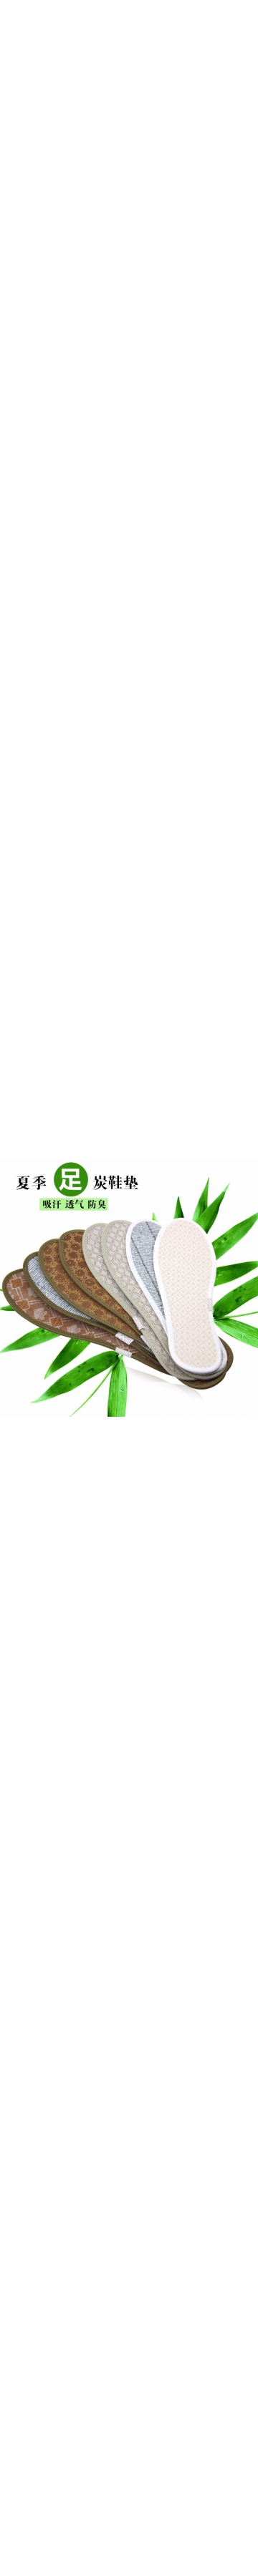 Bamboo charcoal insoles01